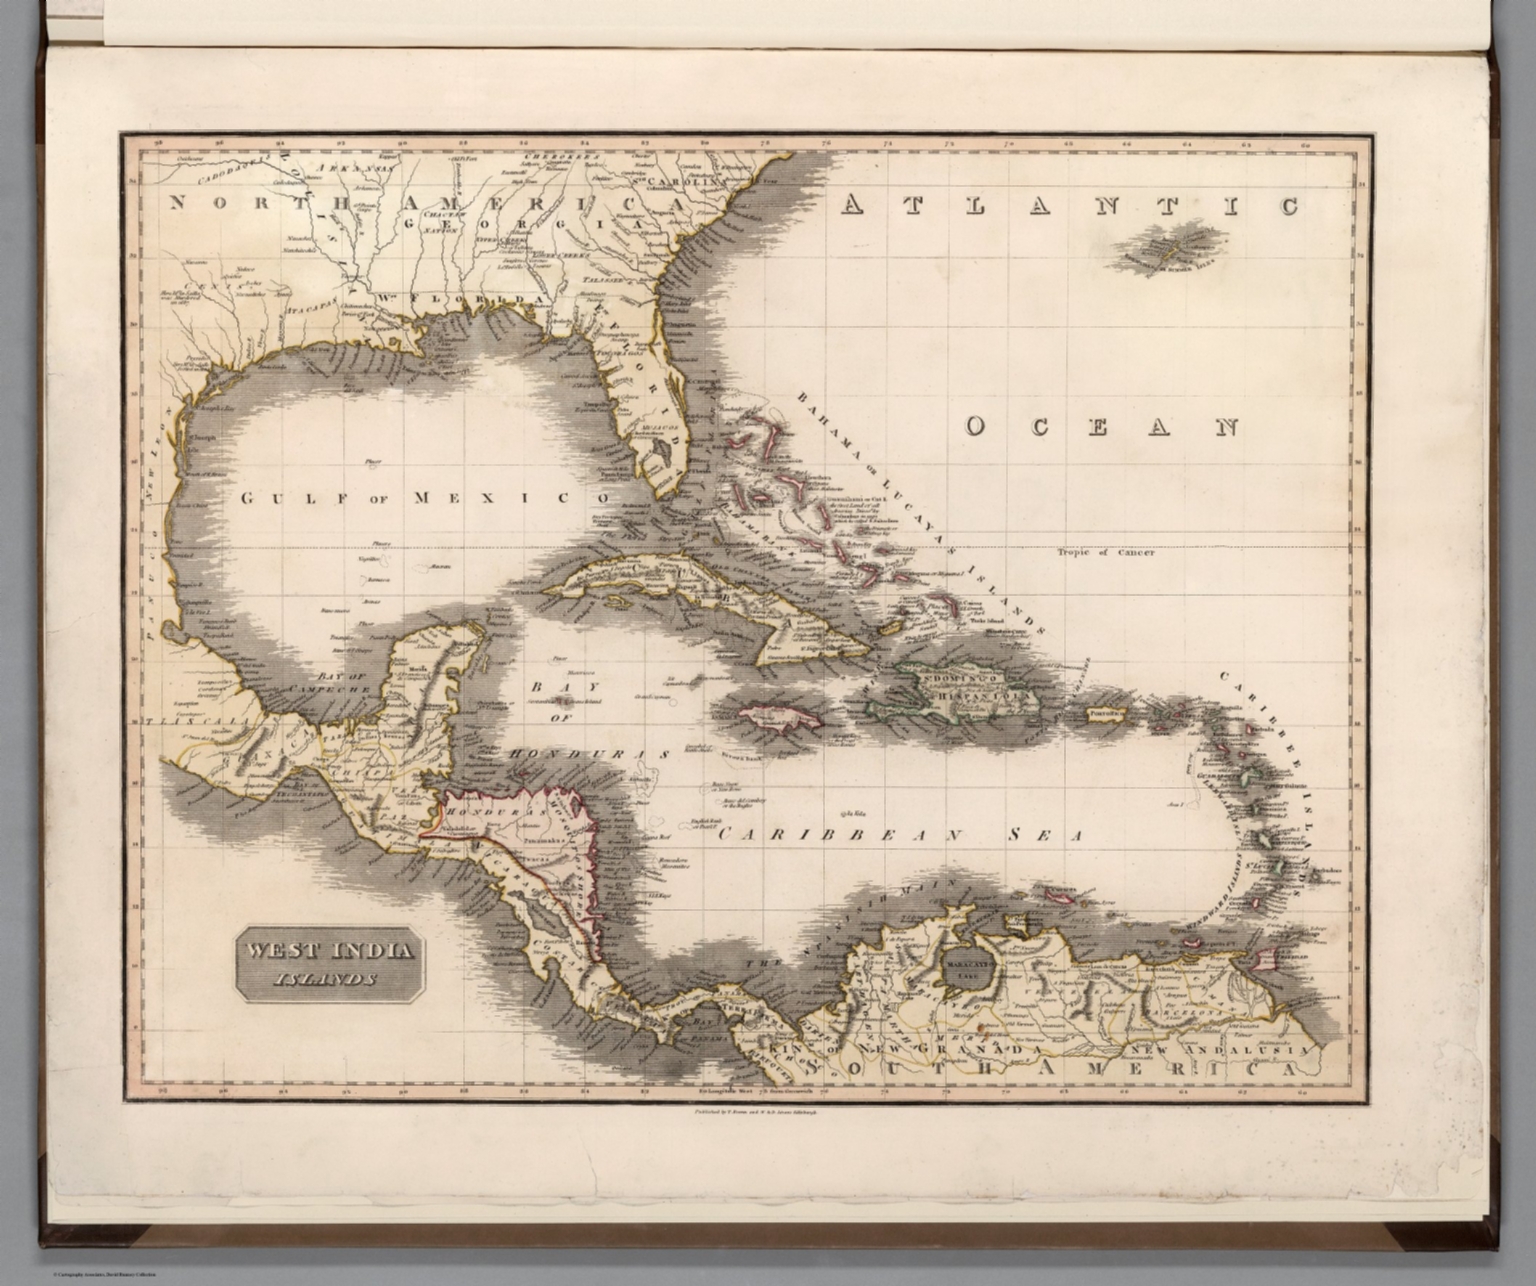 West India Islands - David Rumsey Historical Map Collection